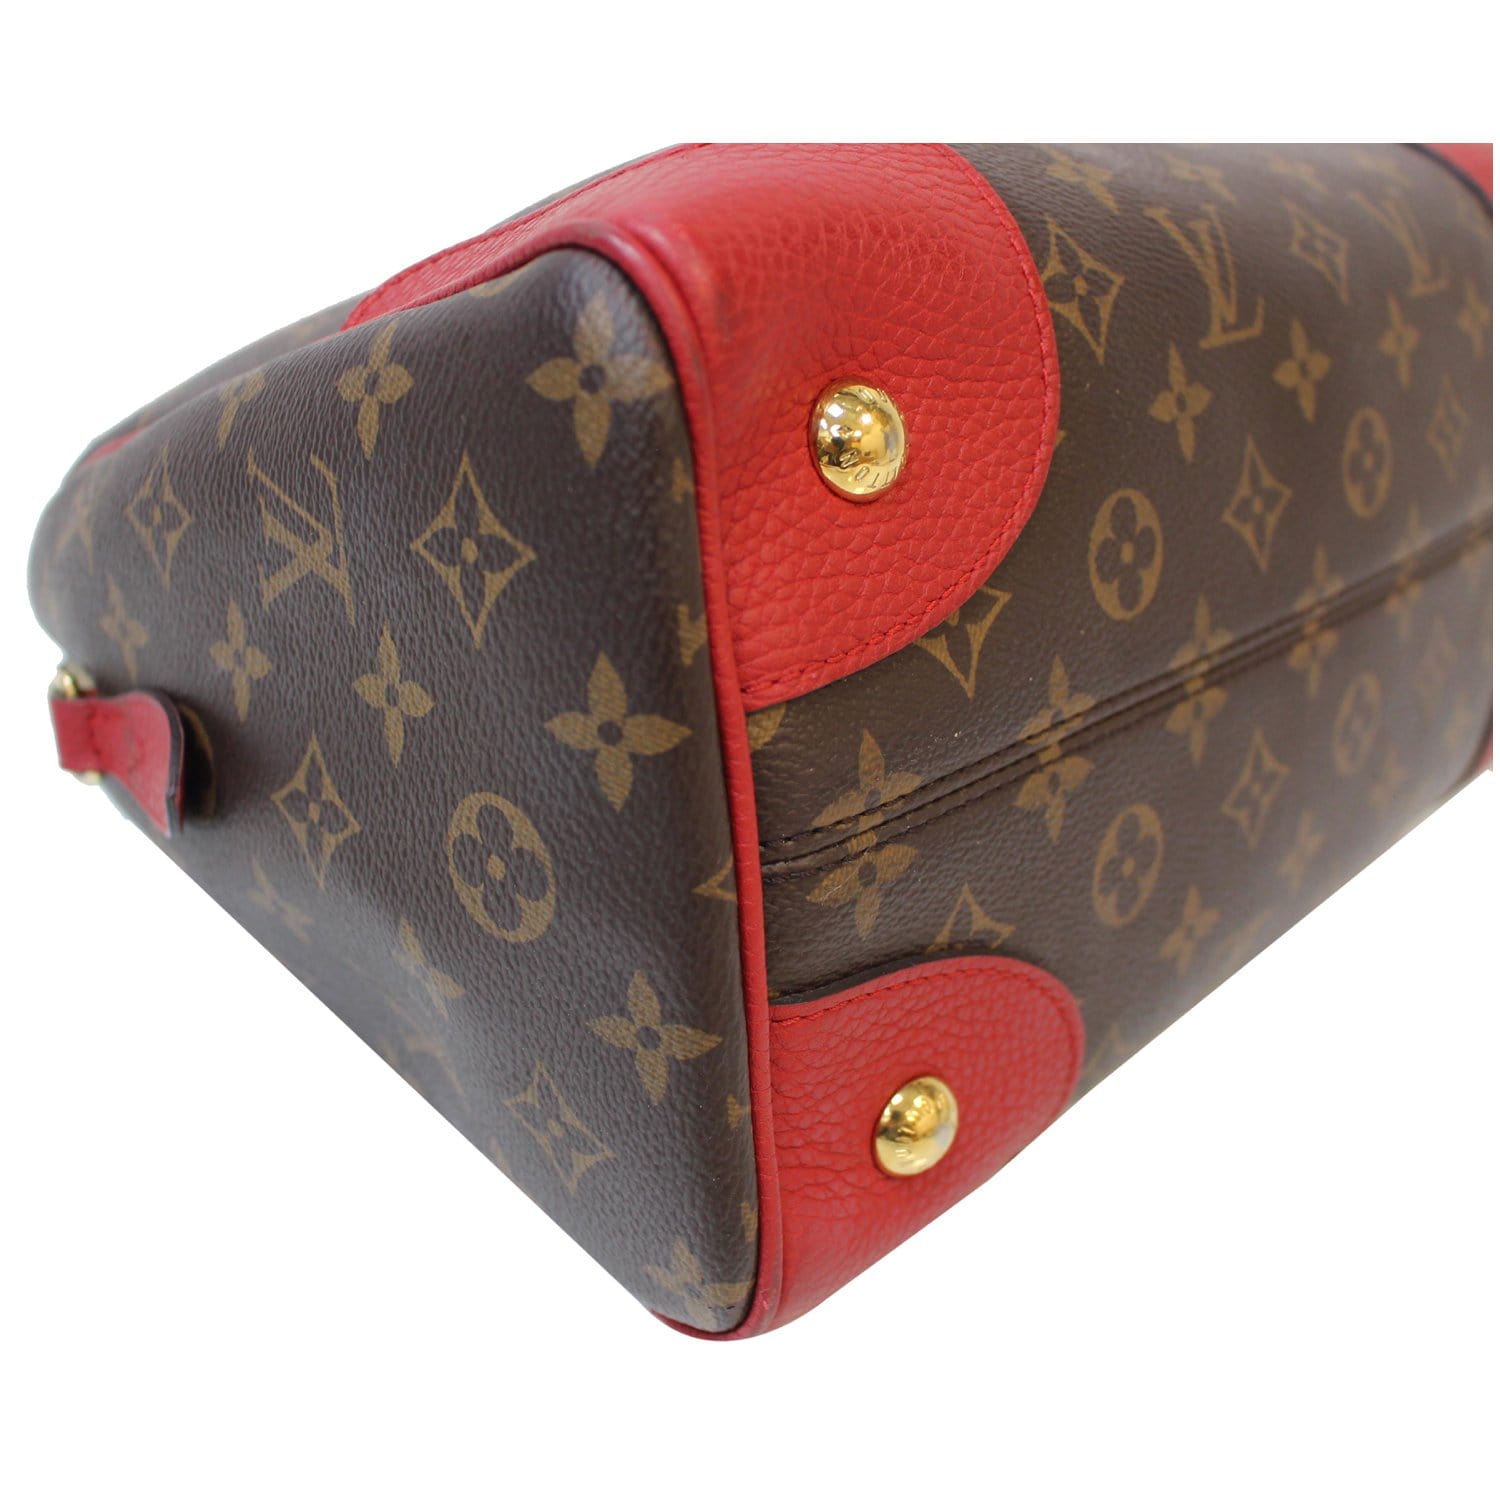 On My Side bag in red monogram canvas Louis Vuitton - Second Hand